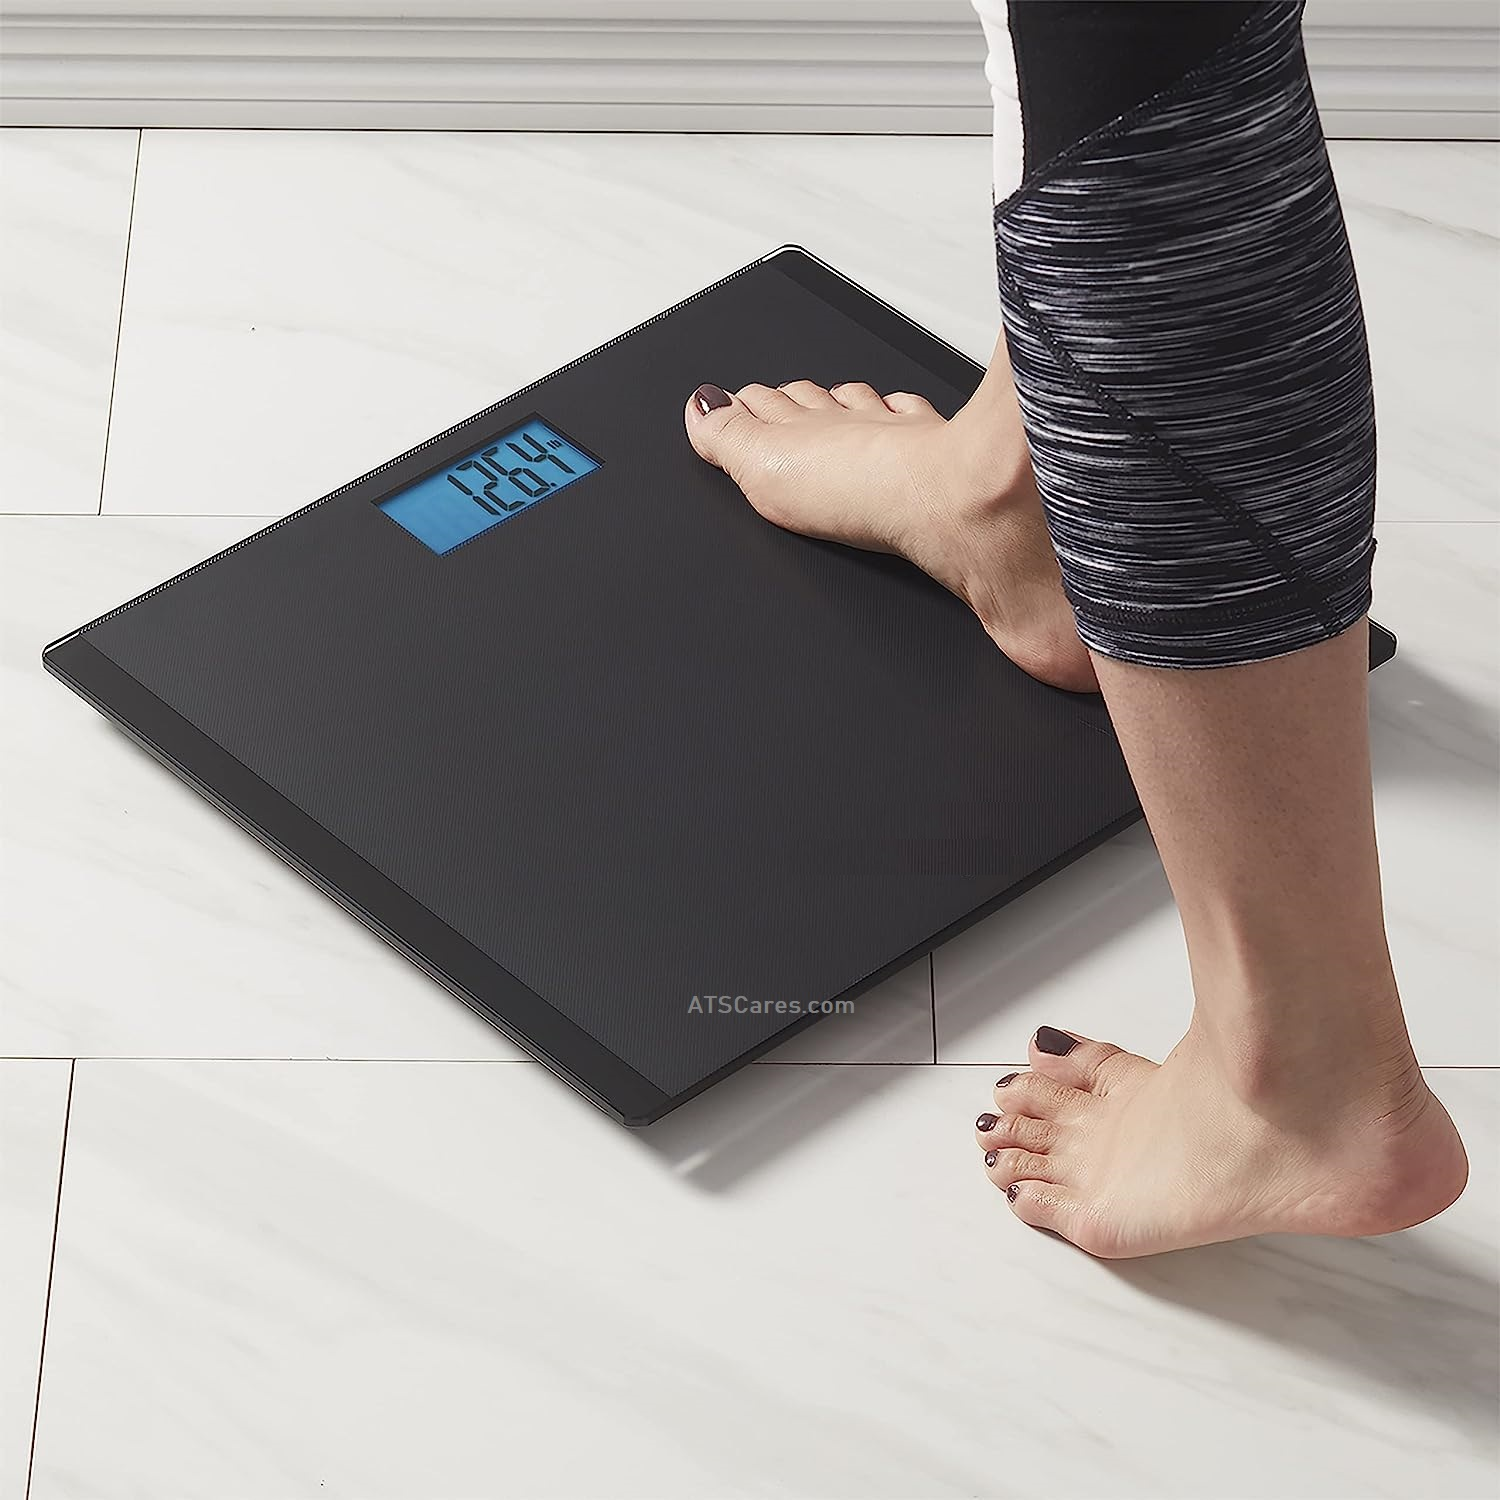  Talking Scales - Large Numbers Stylish Bathroom Scale